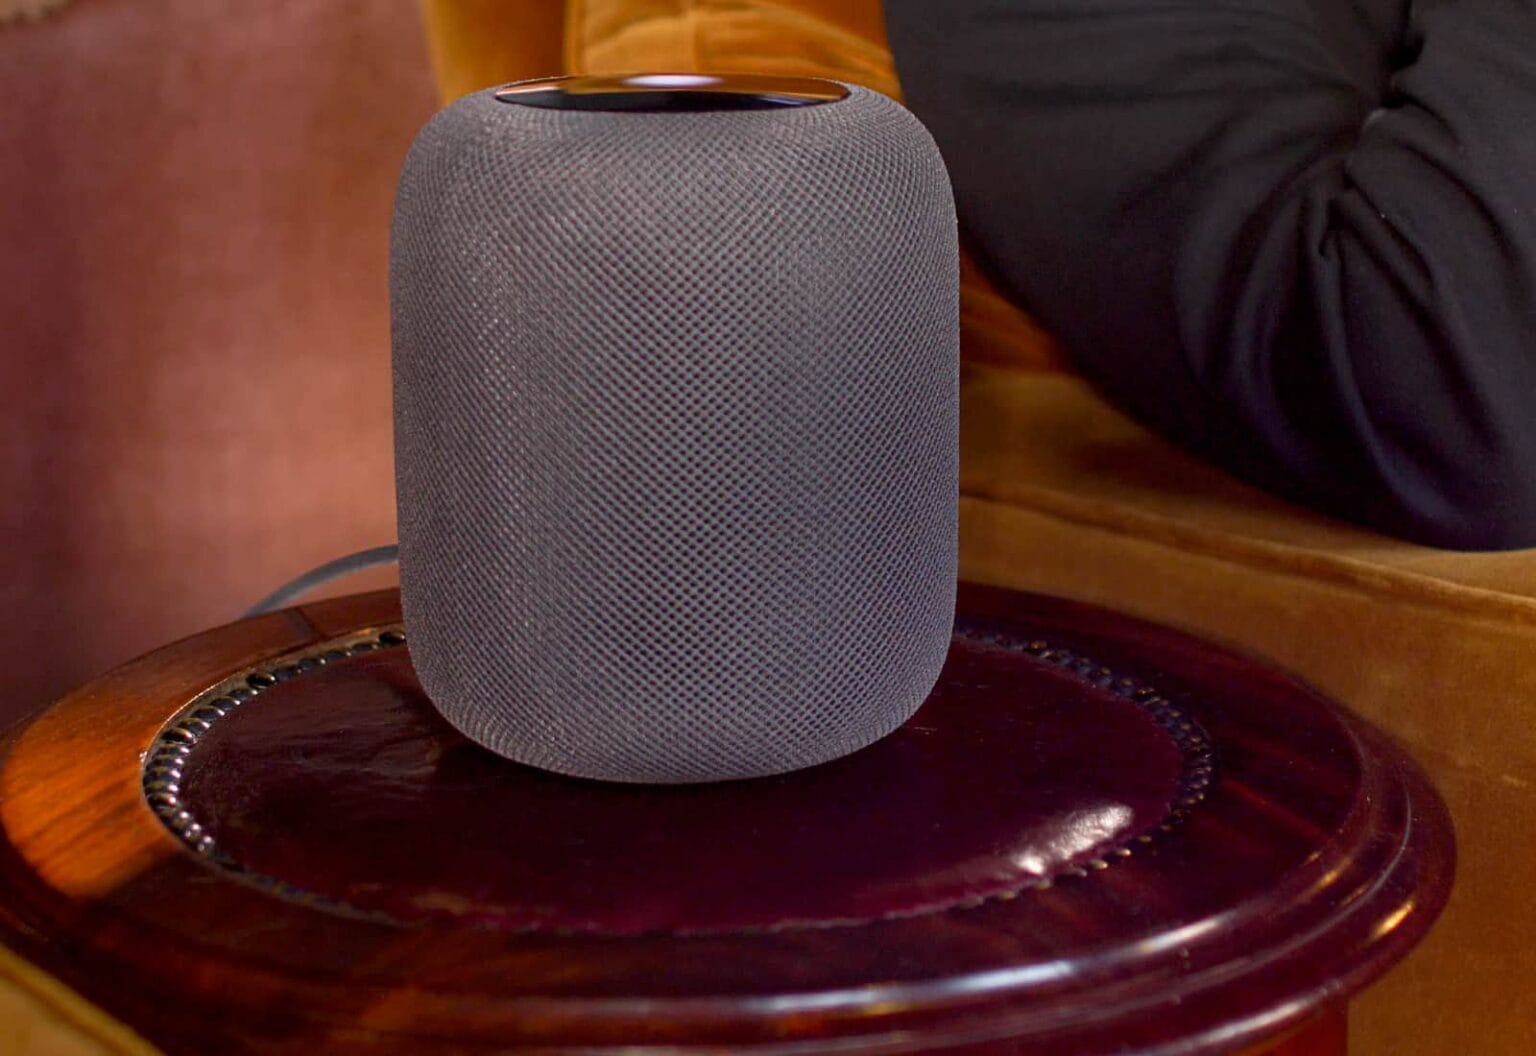 Bucking the usual trend with discontinued gear, the original HomePod is appreciating in value.